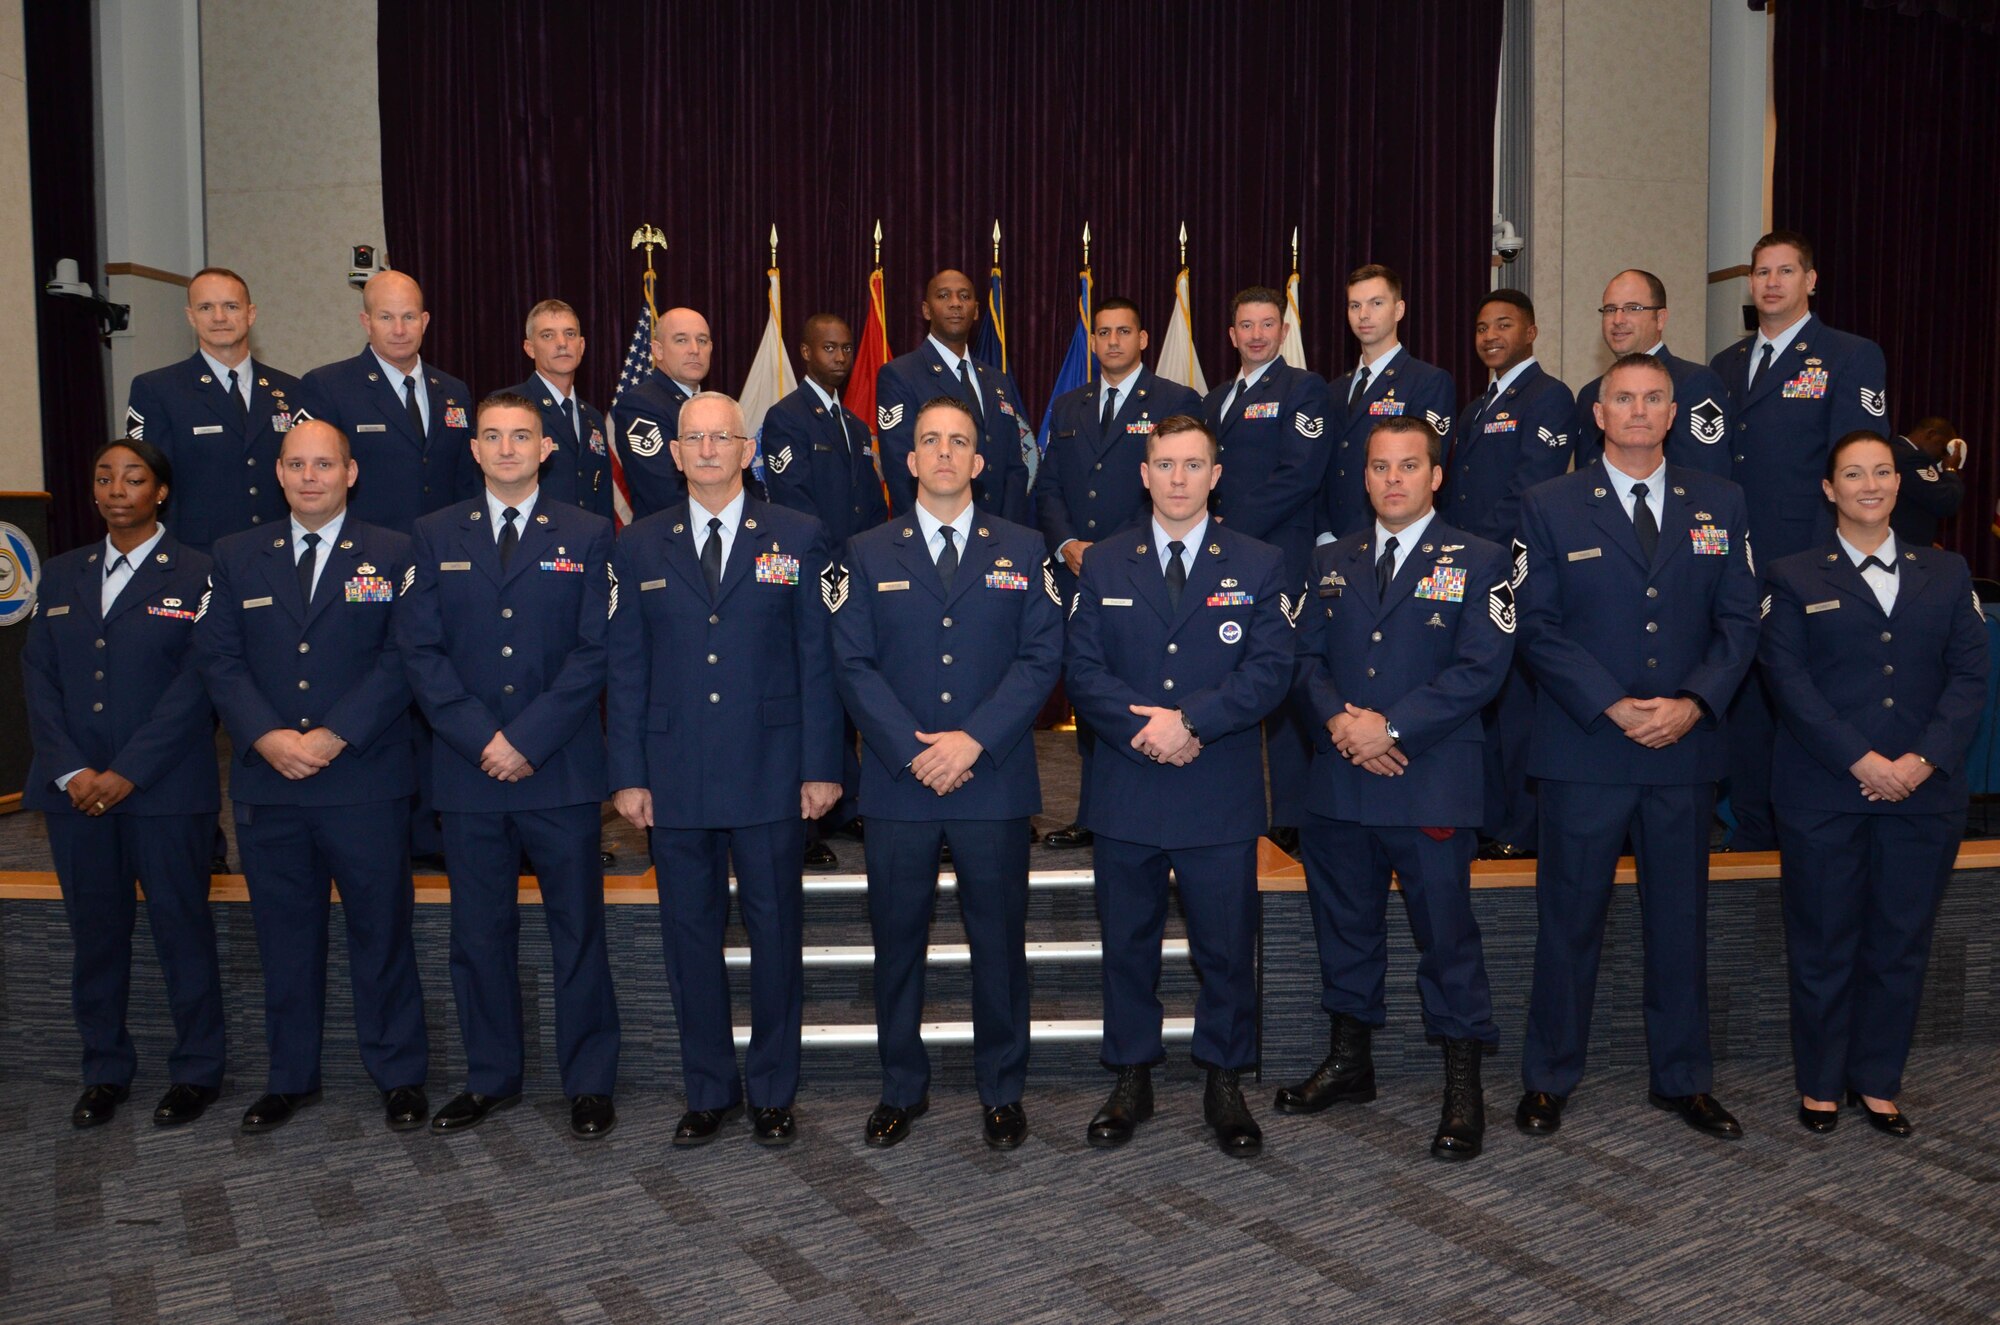 Twenty-one Air Force Reserve Airmen from the 920th Rescue Wing, Patrick Air Force Base, Florida, received their Associate of Applied Science degrees from the Community College of the Air Force Dec. 4 during a ceremony at the Defense Equal Opportunity Management Institute here. 
During the ceremony, Col. Brett Howard, the 920th RQW vice wing commander, presented the diplomas while 920th RQW Command Chief Timothy Bianchi presented special coins to each graduate.
